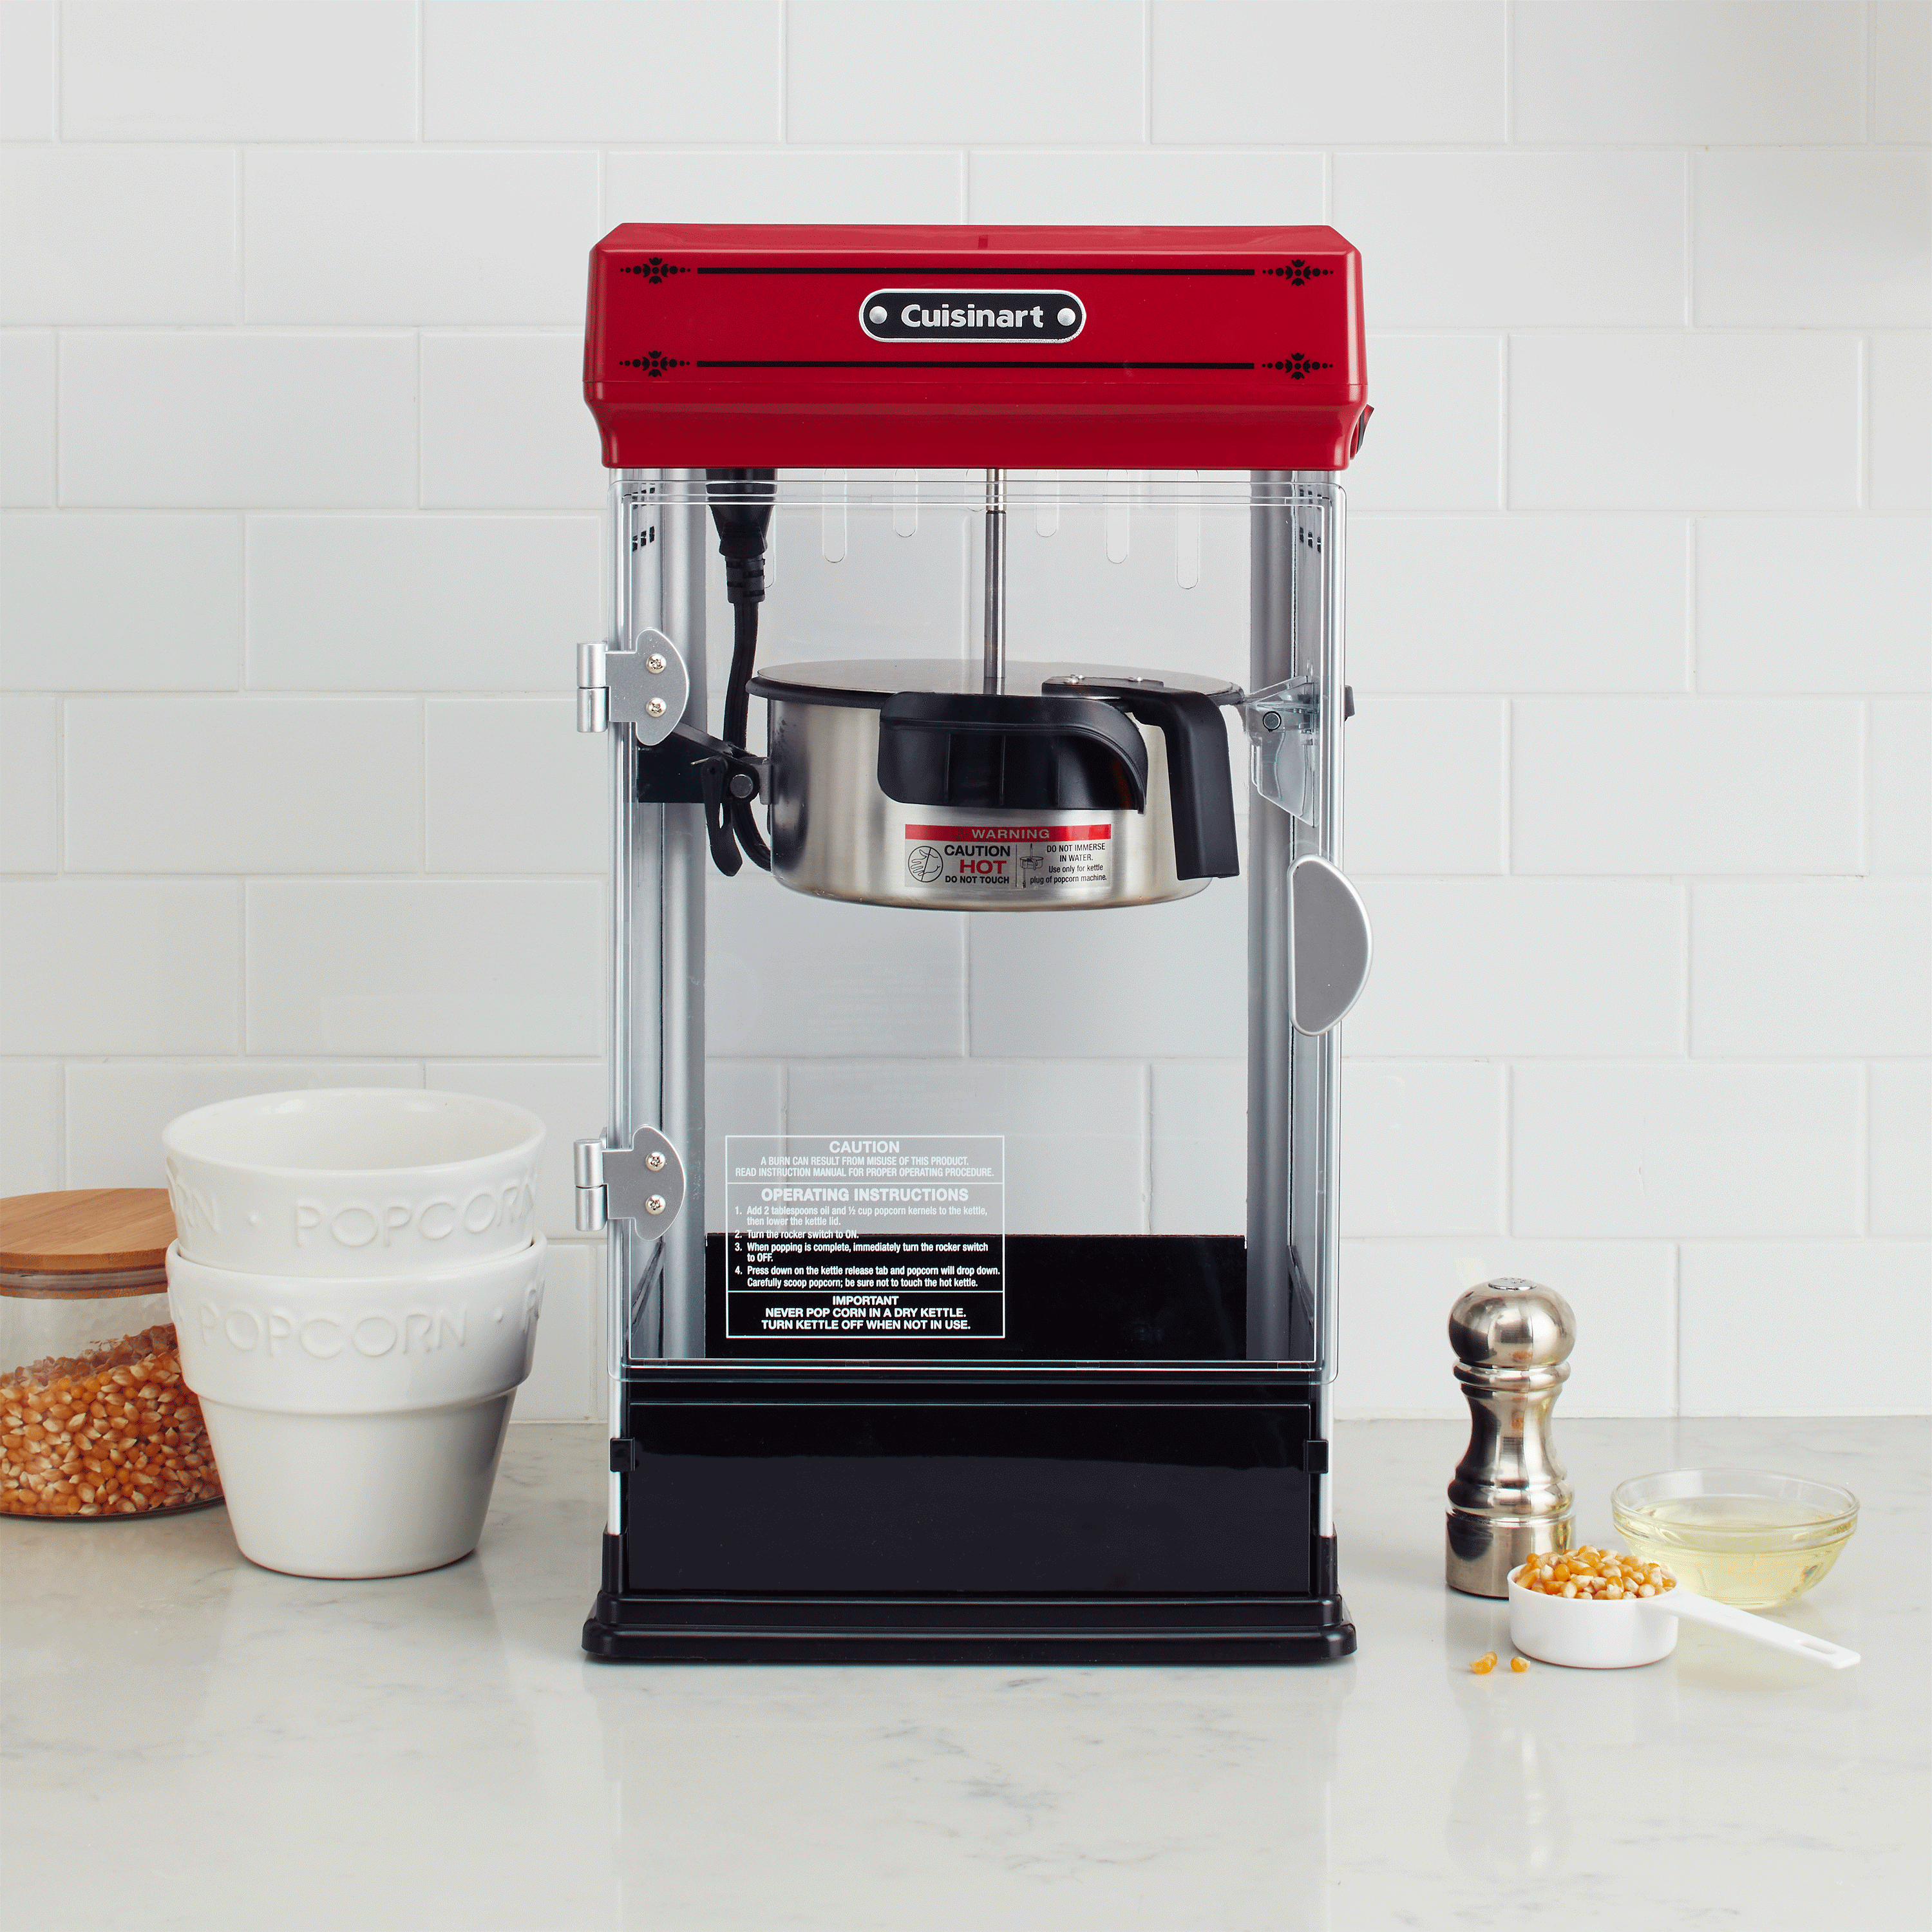 https://www.cuisinart.com/globalassets/cuisinart-image-feed/cpm-28/cpm28_holiday.gif